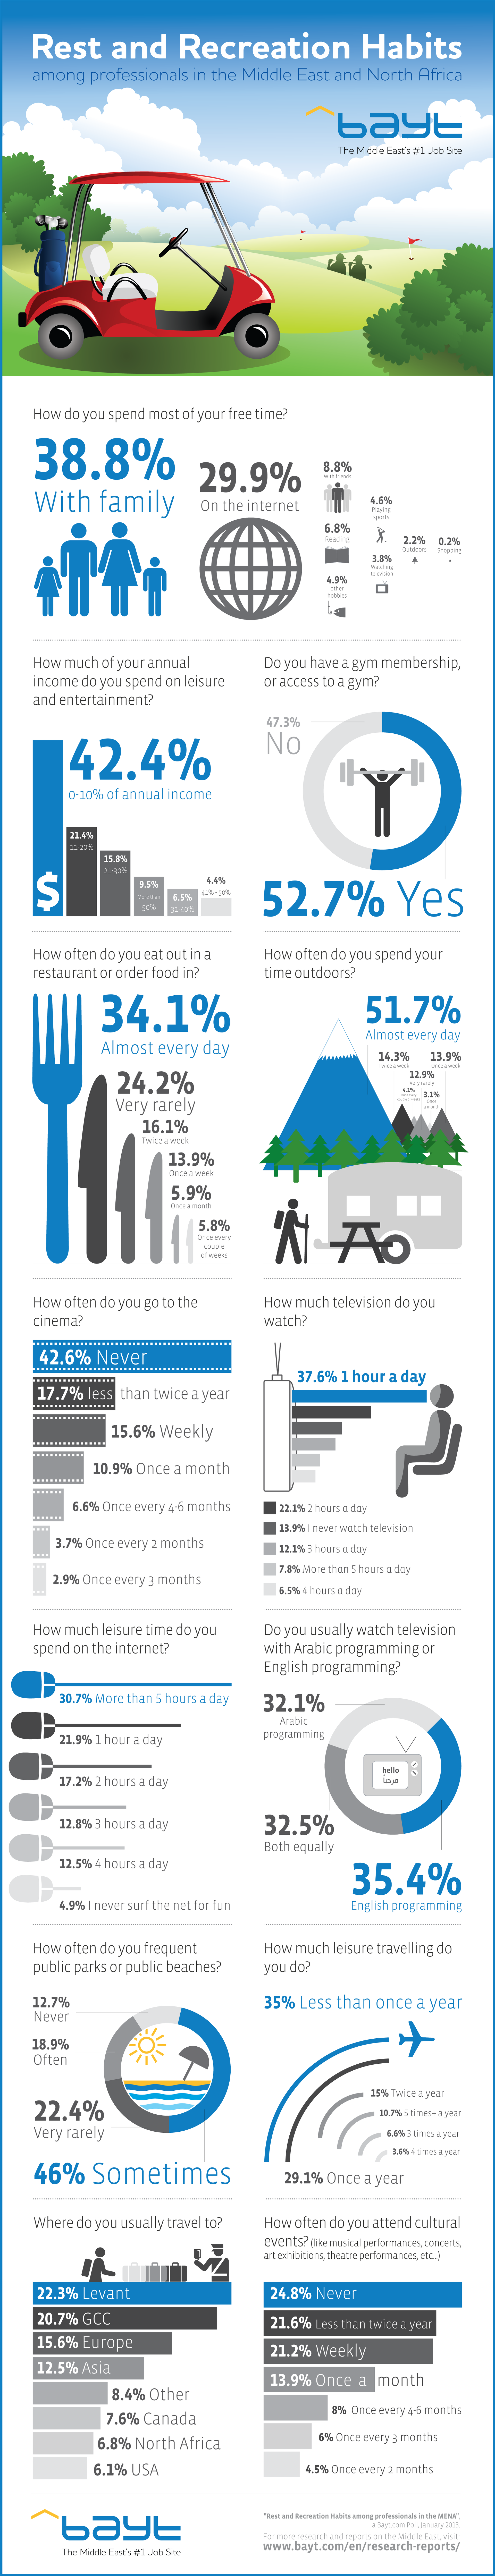 Bayt.com Infographic: Rest and Recreation Habits Among MENA